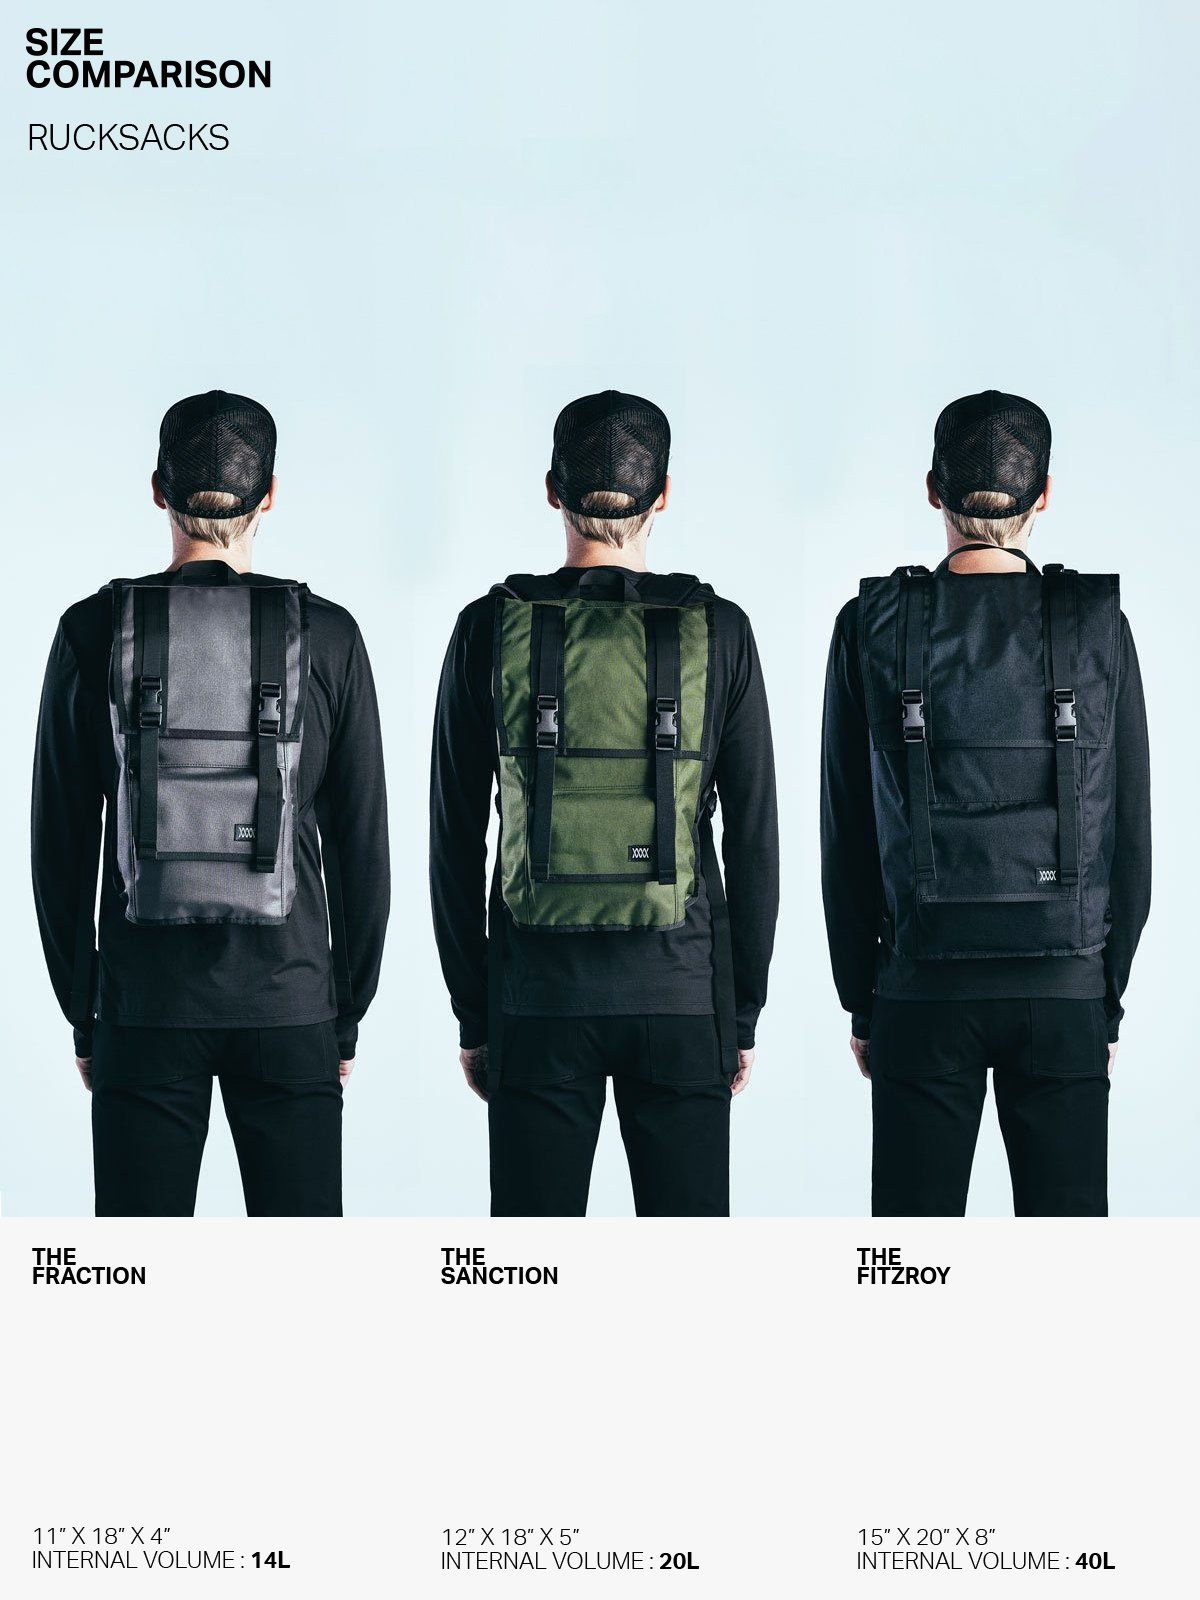 Fitzroy : AP by Mission Workshop - Weatherproof Bags & Technical Apparel - San Francisco & Los Angeles - Built to endure - Guaranteed forever